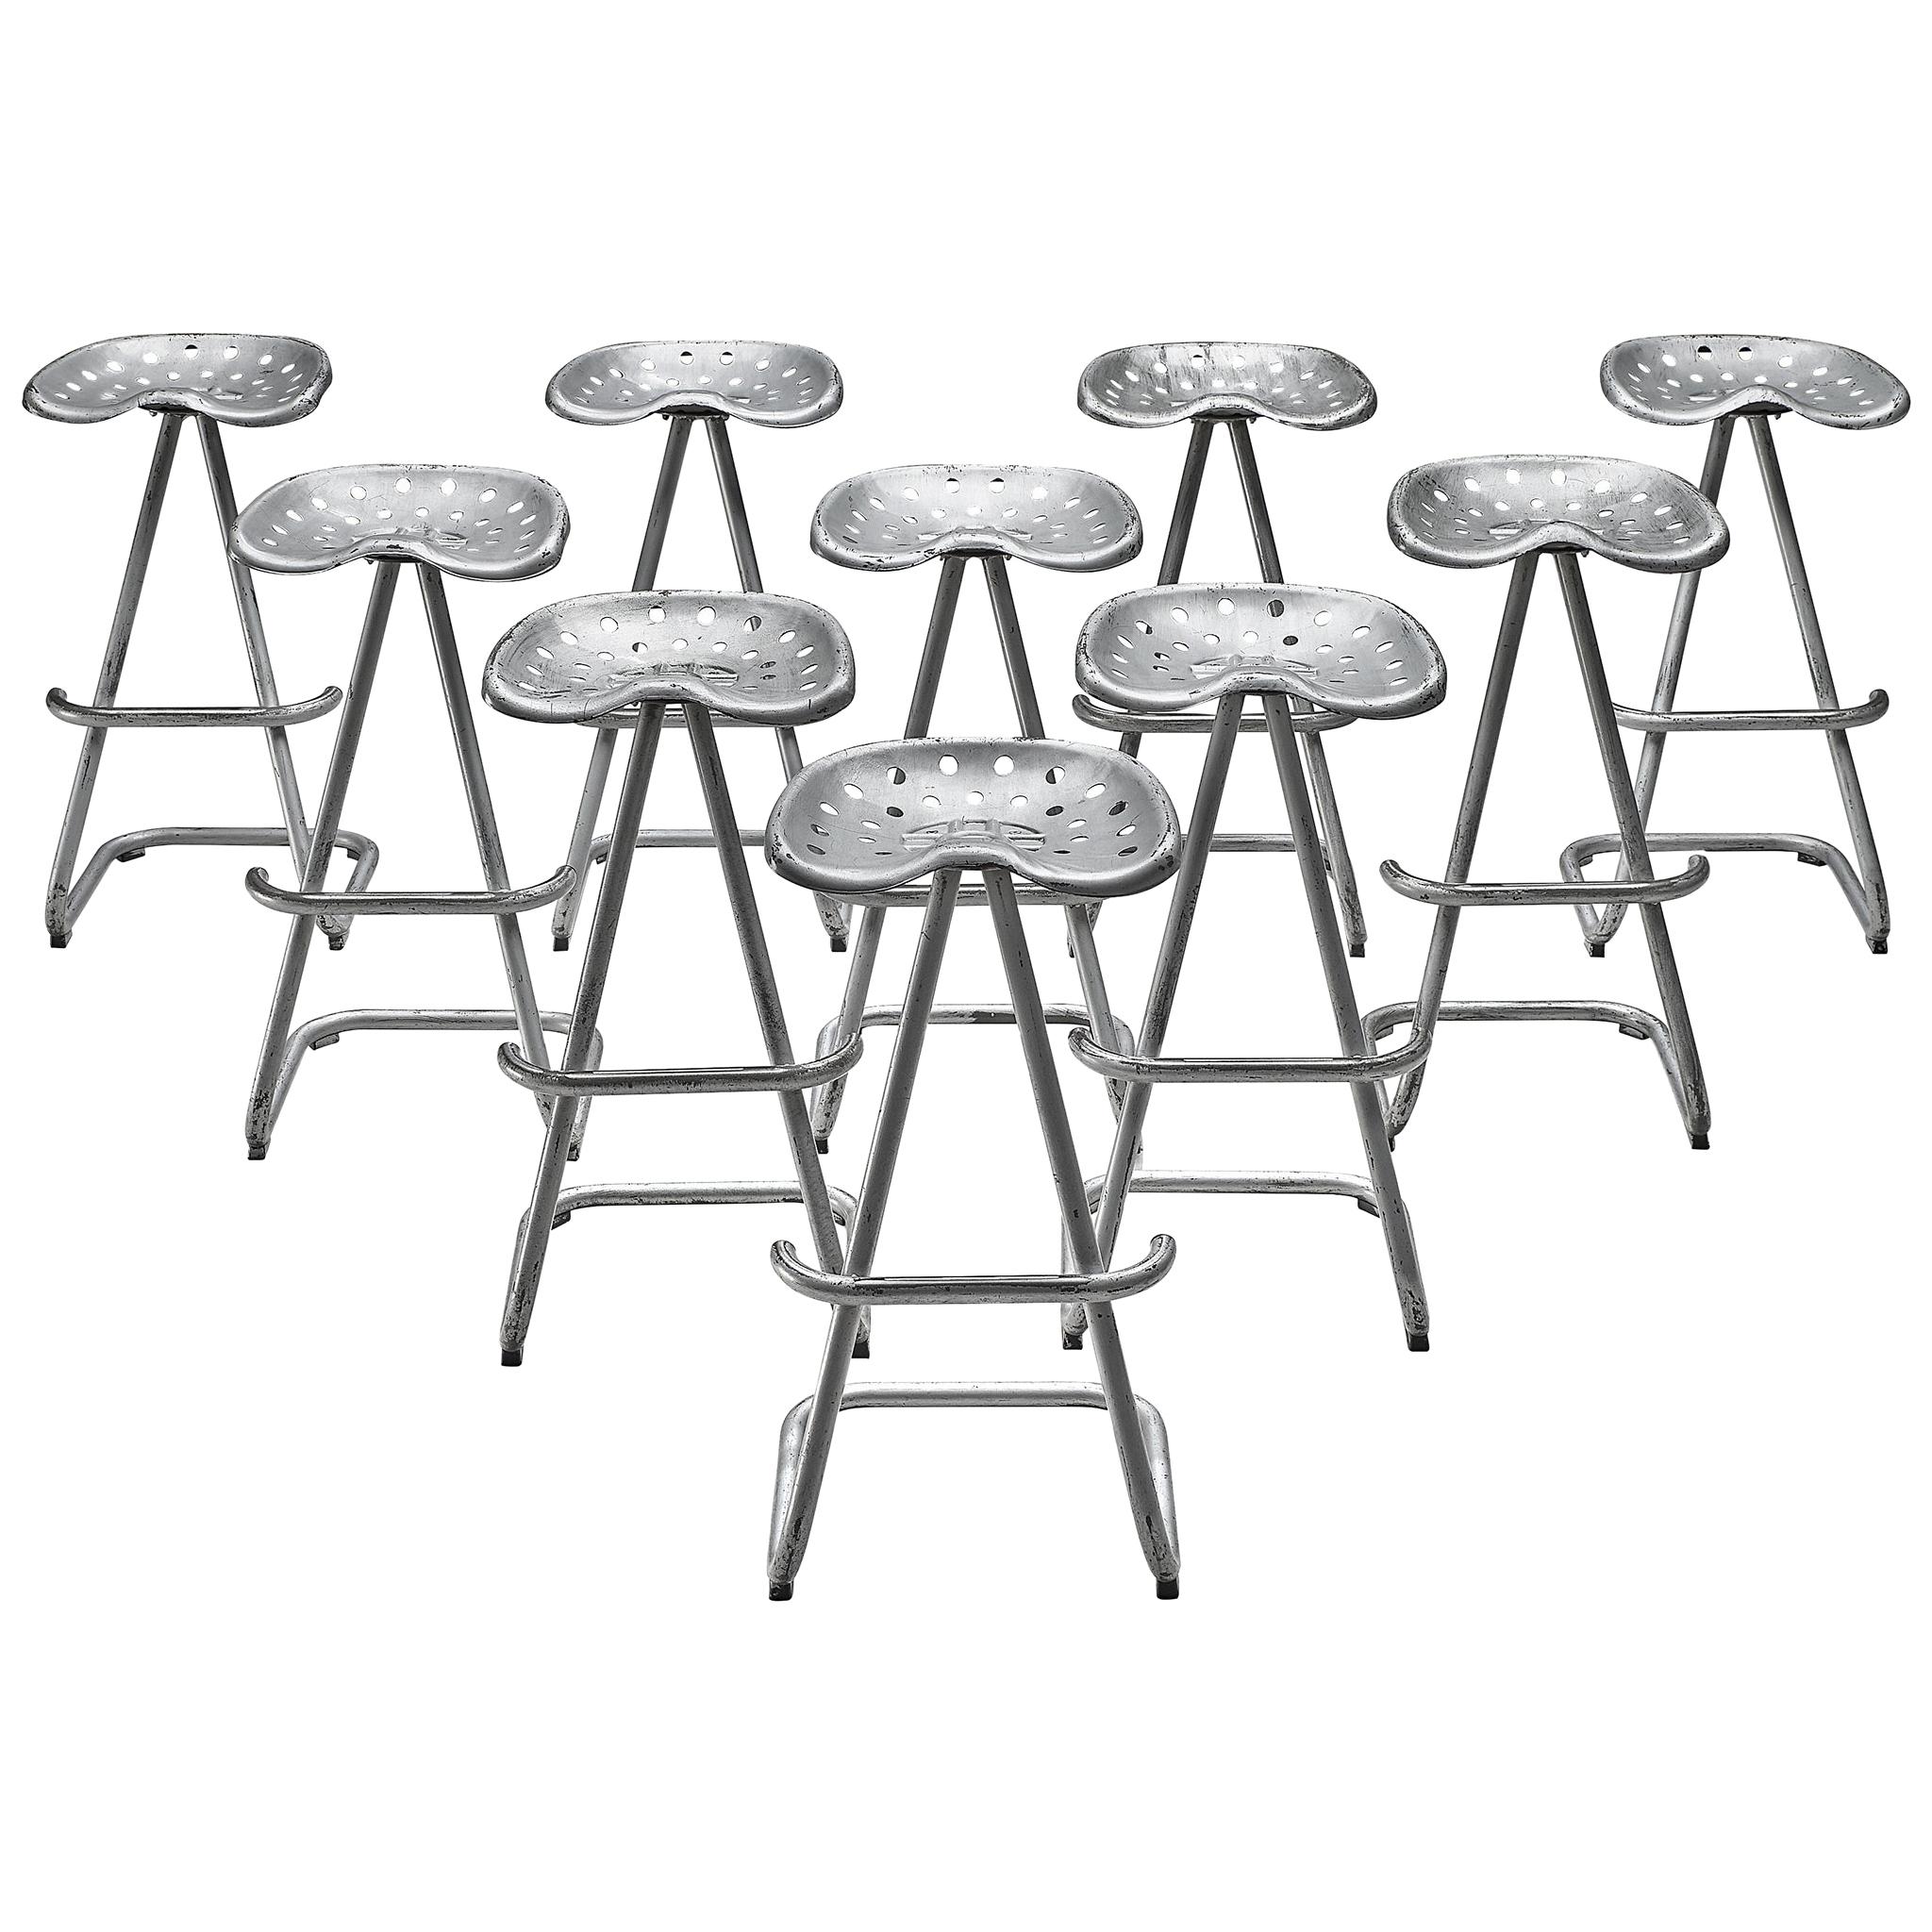 Set of "Tractor" Silver Stools, 1960s